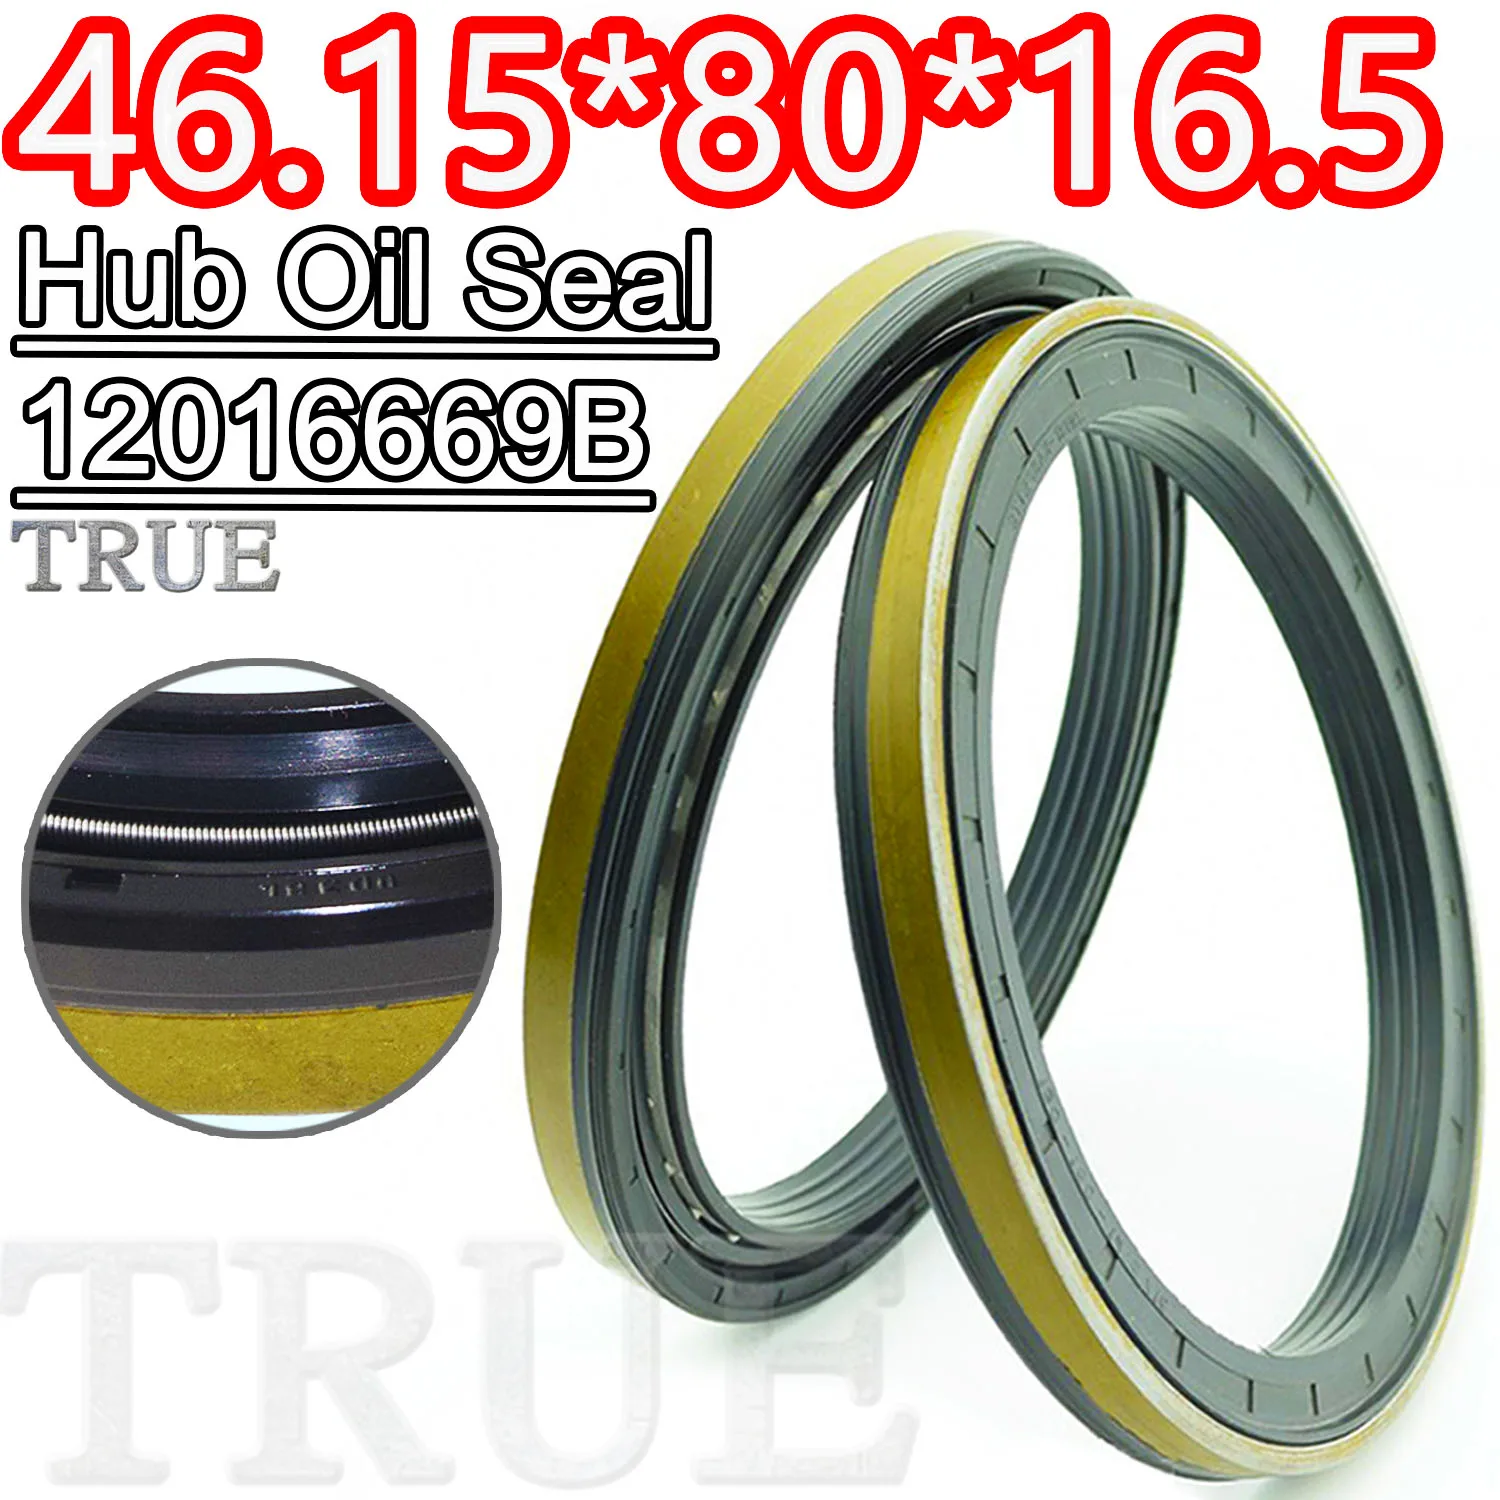 

Hub Oil Seal 46.15*80*16.5 For Tractor Cat 12016669B 46.15X80X16.5 Mirror automobile KASSETTE-2 Corteco Accessories Pipe Gasket